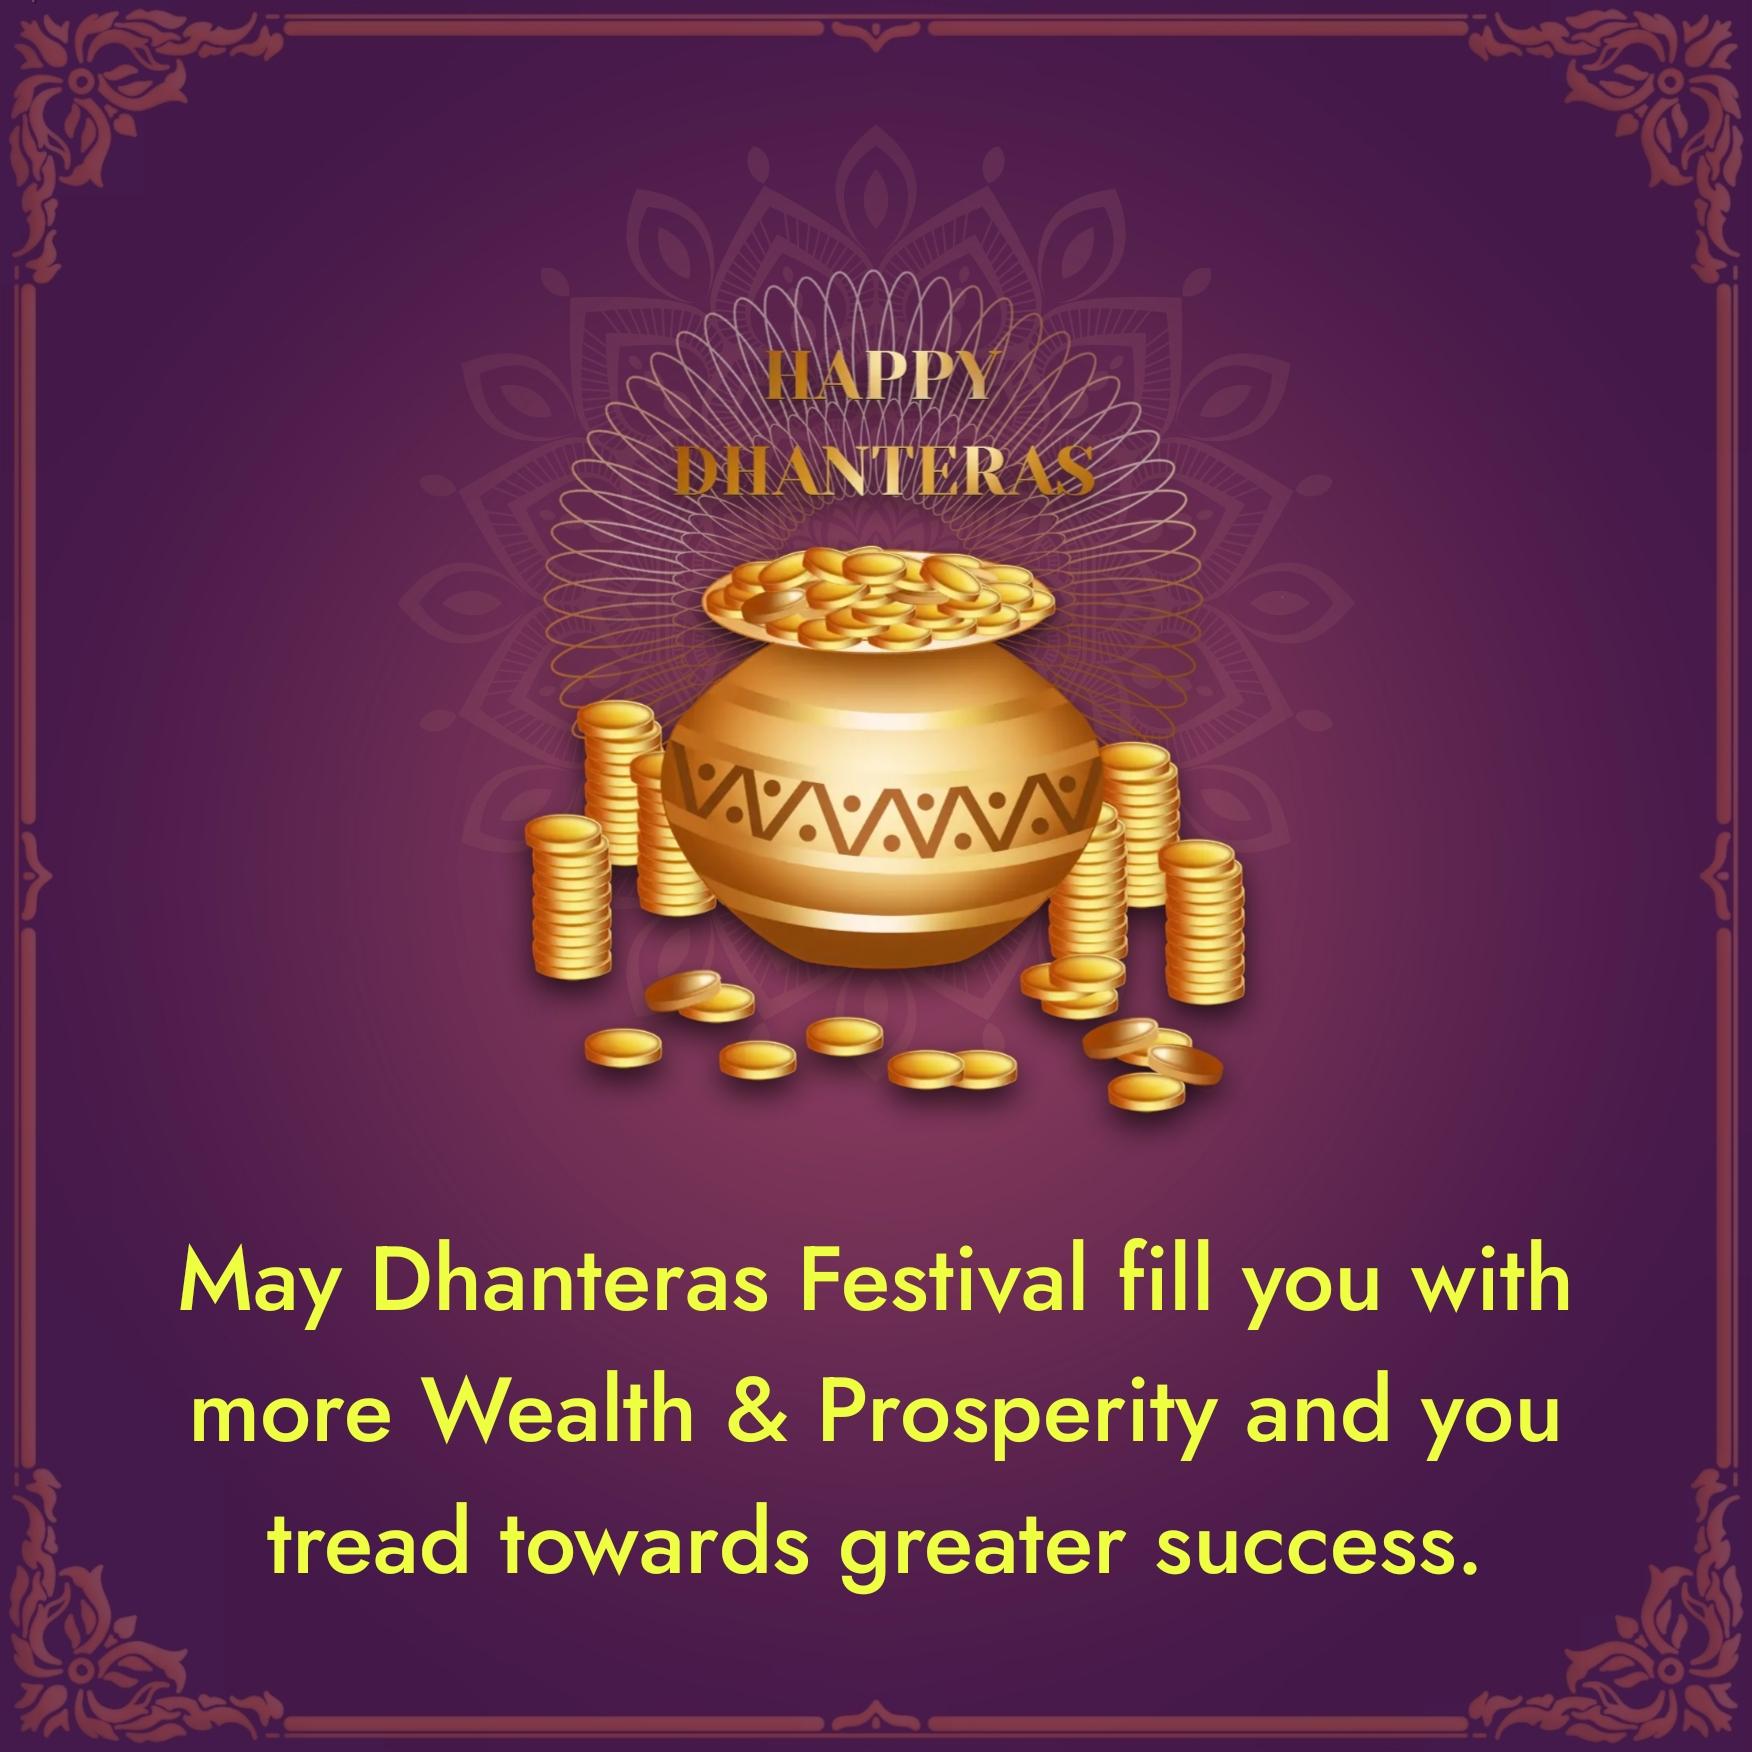 May Dhanteras Festival fill you with more Wealth